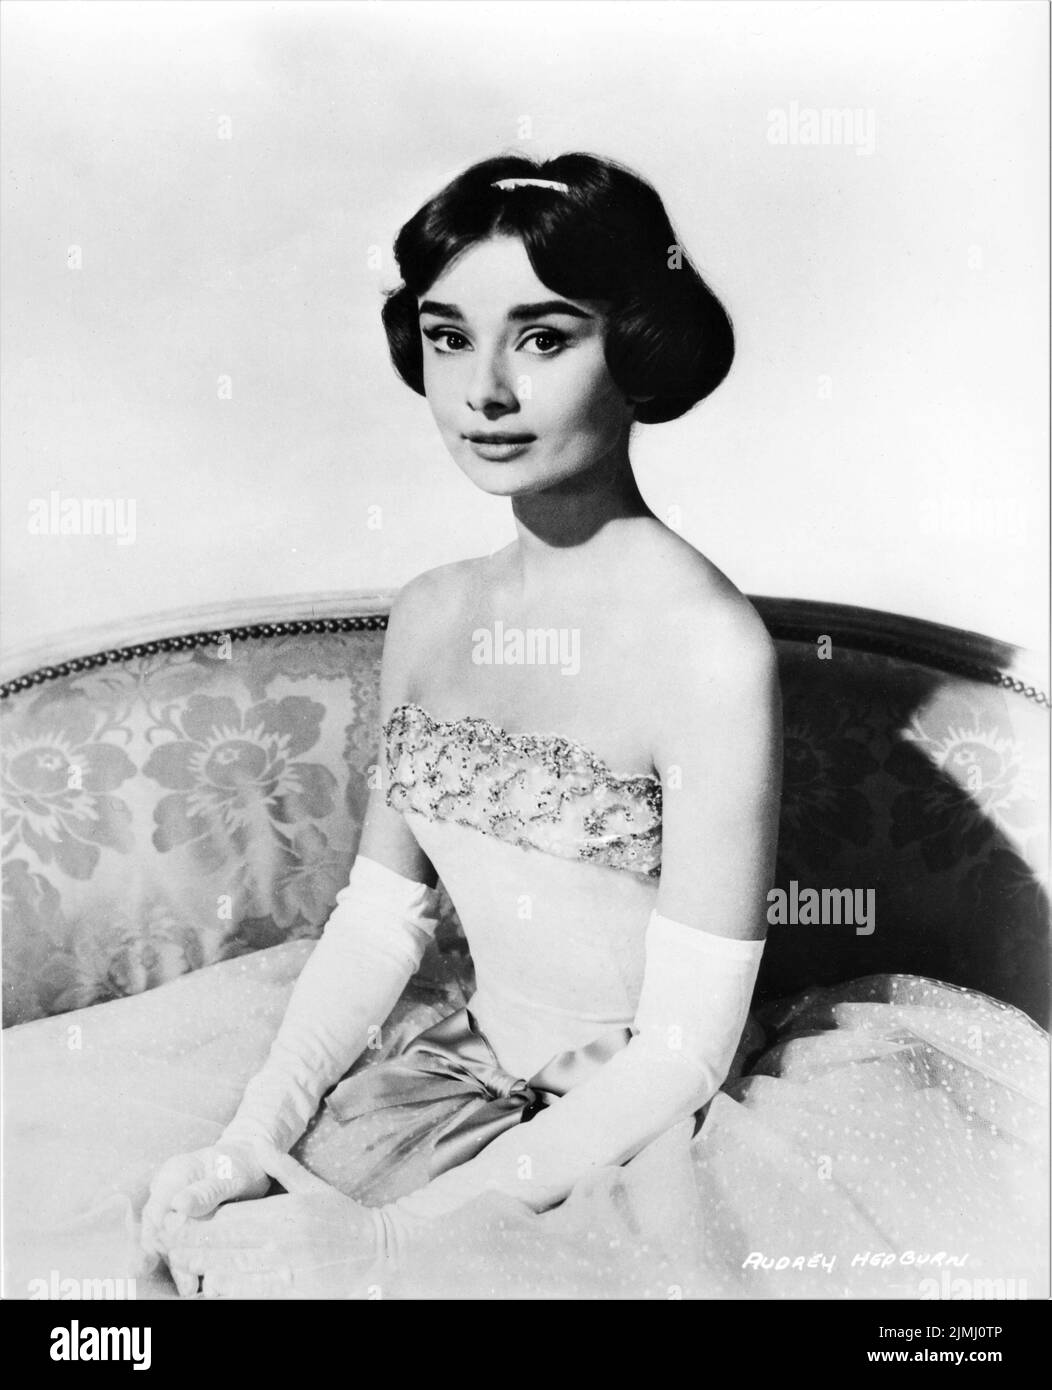 AUDREY HEPBURN Portrait in LOVE IN THE AFTERNOON 1957 director BILLY WILDER screenplay by Billy Wilder and I.A.L. Diamond wardrobe for Audrey Hepburn Hubert de Givenchy Billy Wilder Productions / Allied Artists Pictures Stock Photo